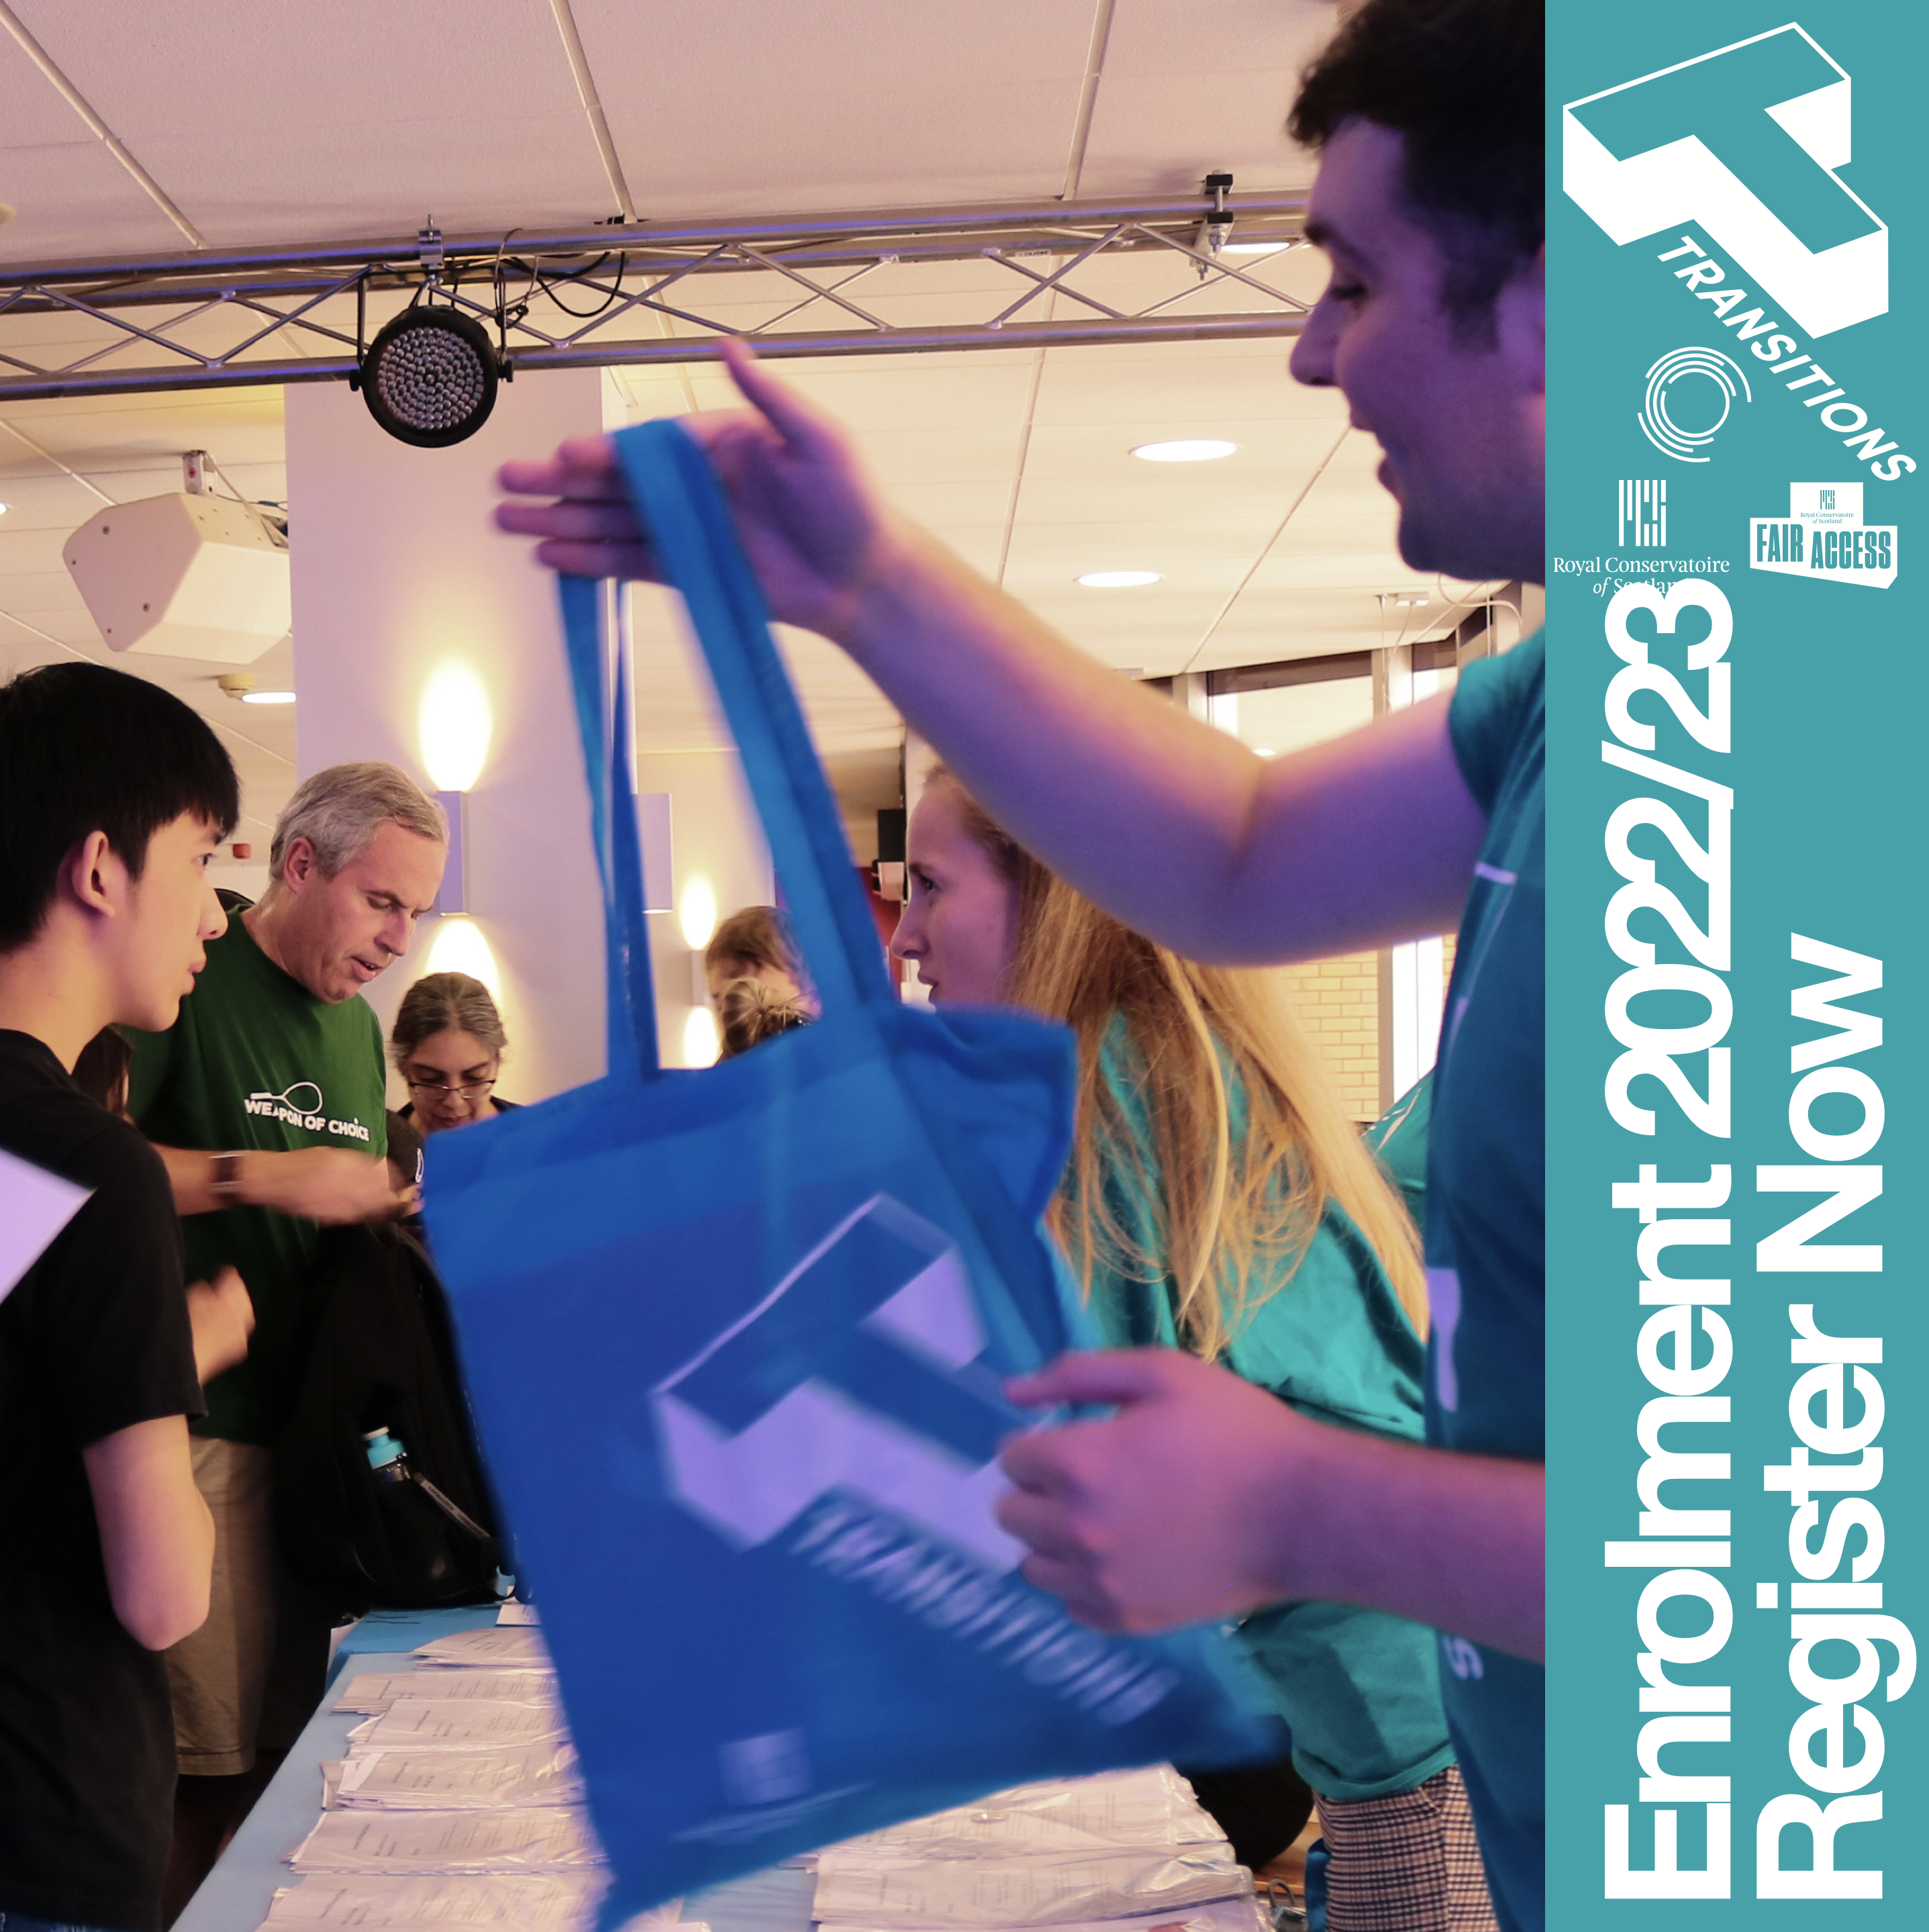 Staff member handing over a tote bag to unseen student